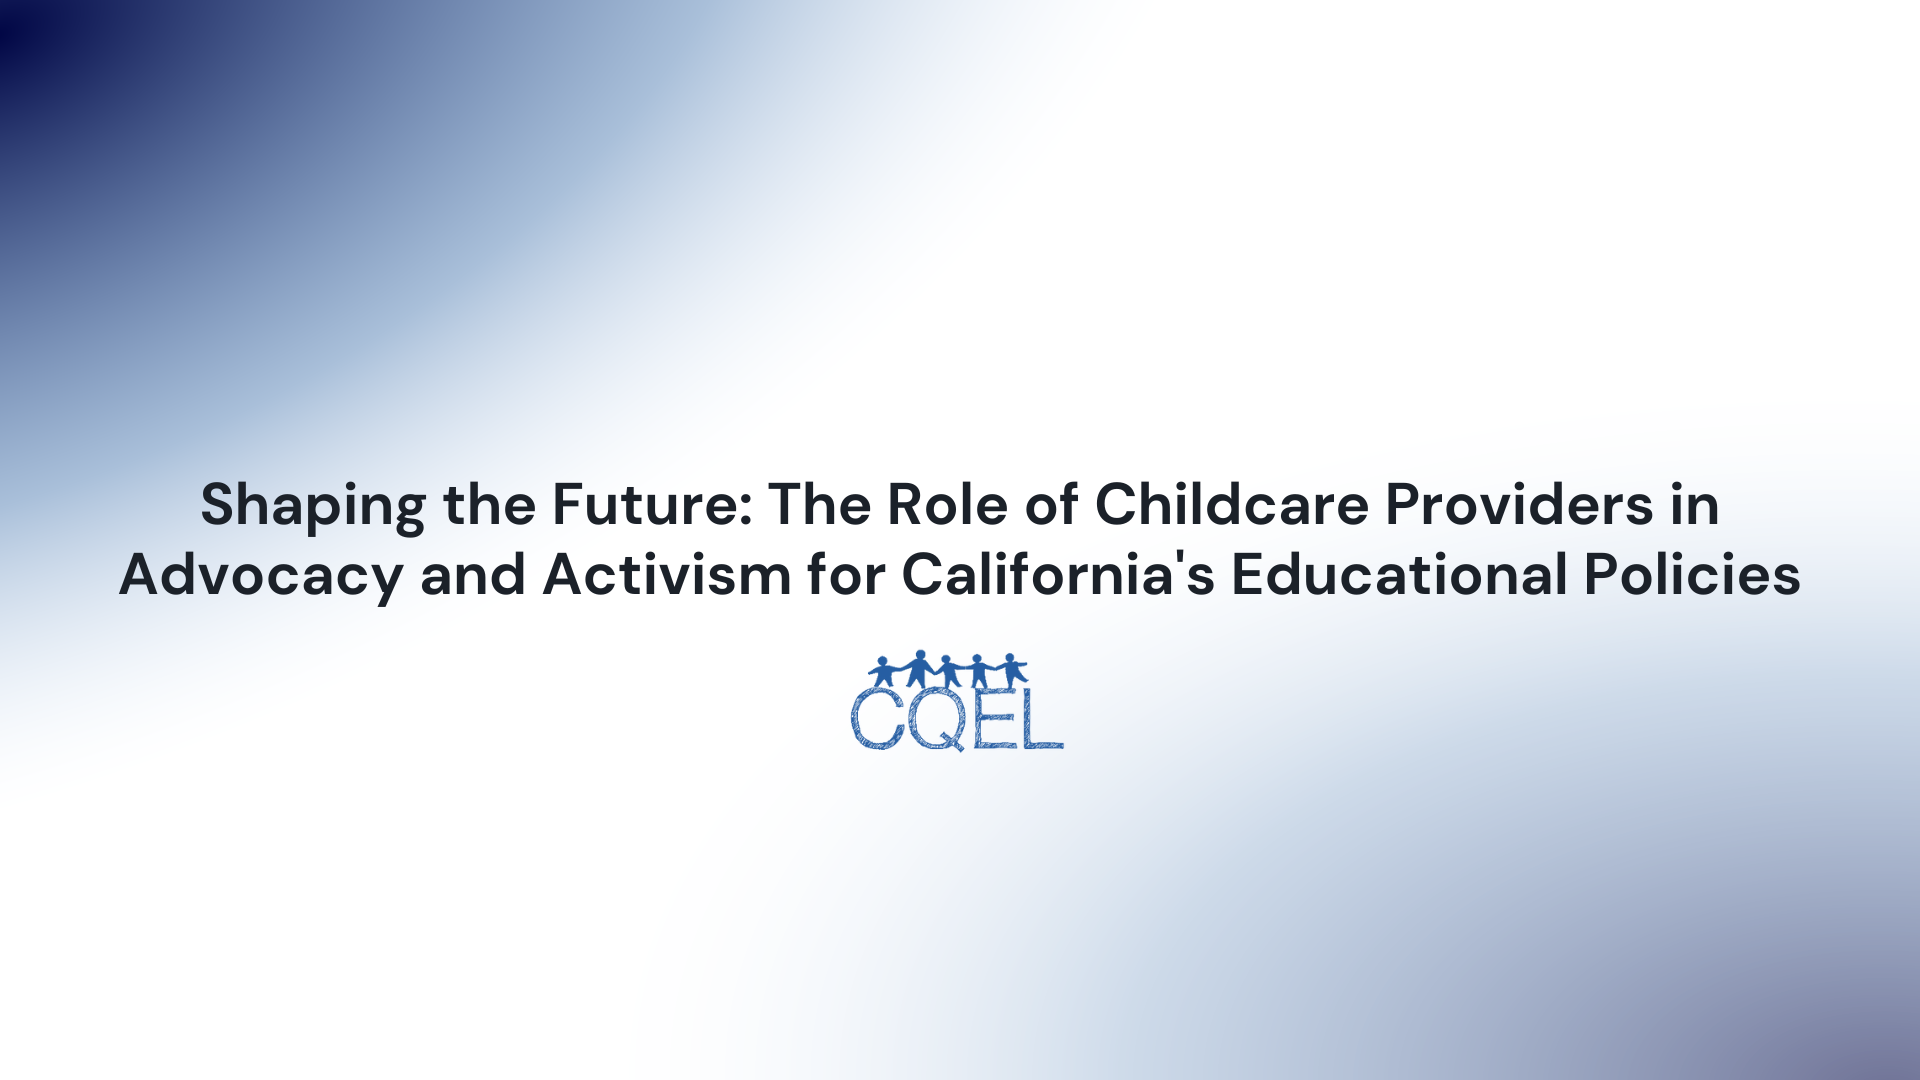 Shaping the Future: The Role of Childcare Providers in Advocacy and Activism for California's Educational Policies